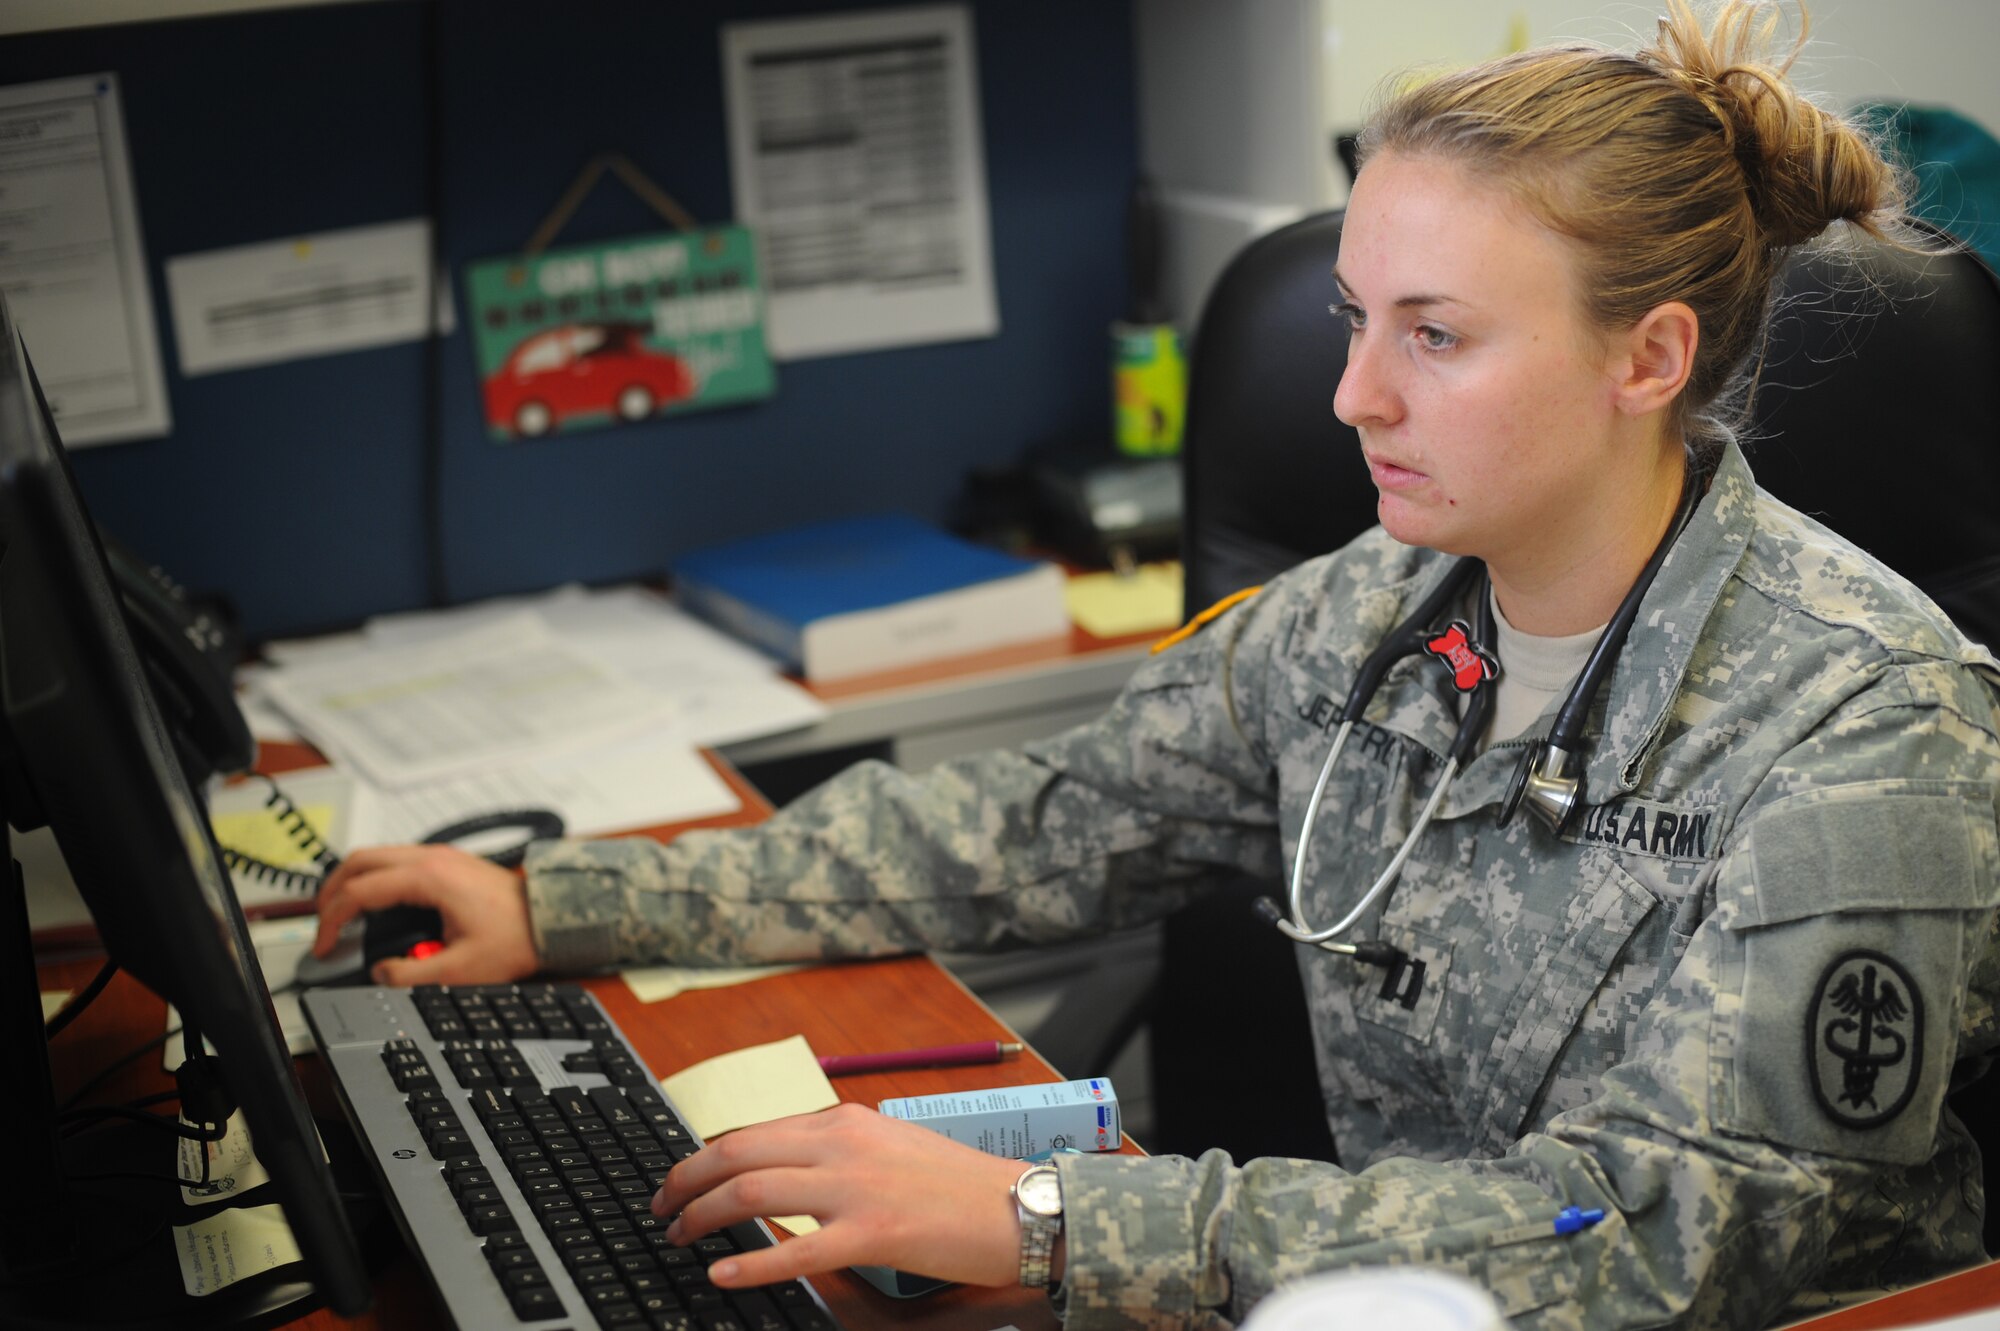 Army Capt. Amanda Jeffries, Chief of Dover Branch Veterinary Services, inputs patient information into her computer after a visit, October 15, 2014, at the Veterinary Treatment Facility on Dover Air Force Base, Del. The VTF now maintains all their patient records electronically. (U.S. Air Force photo by Staff Sgt. Elizabeth Morris)